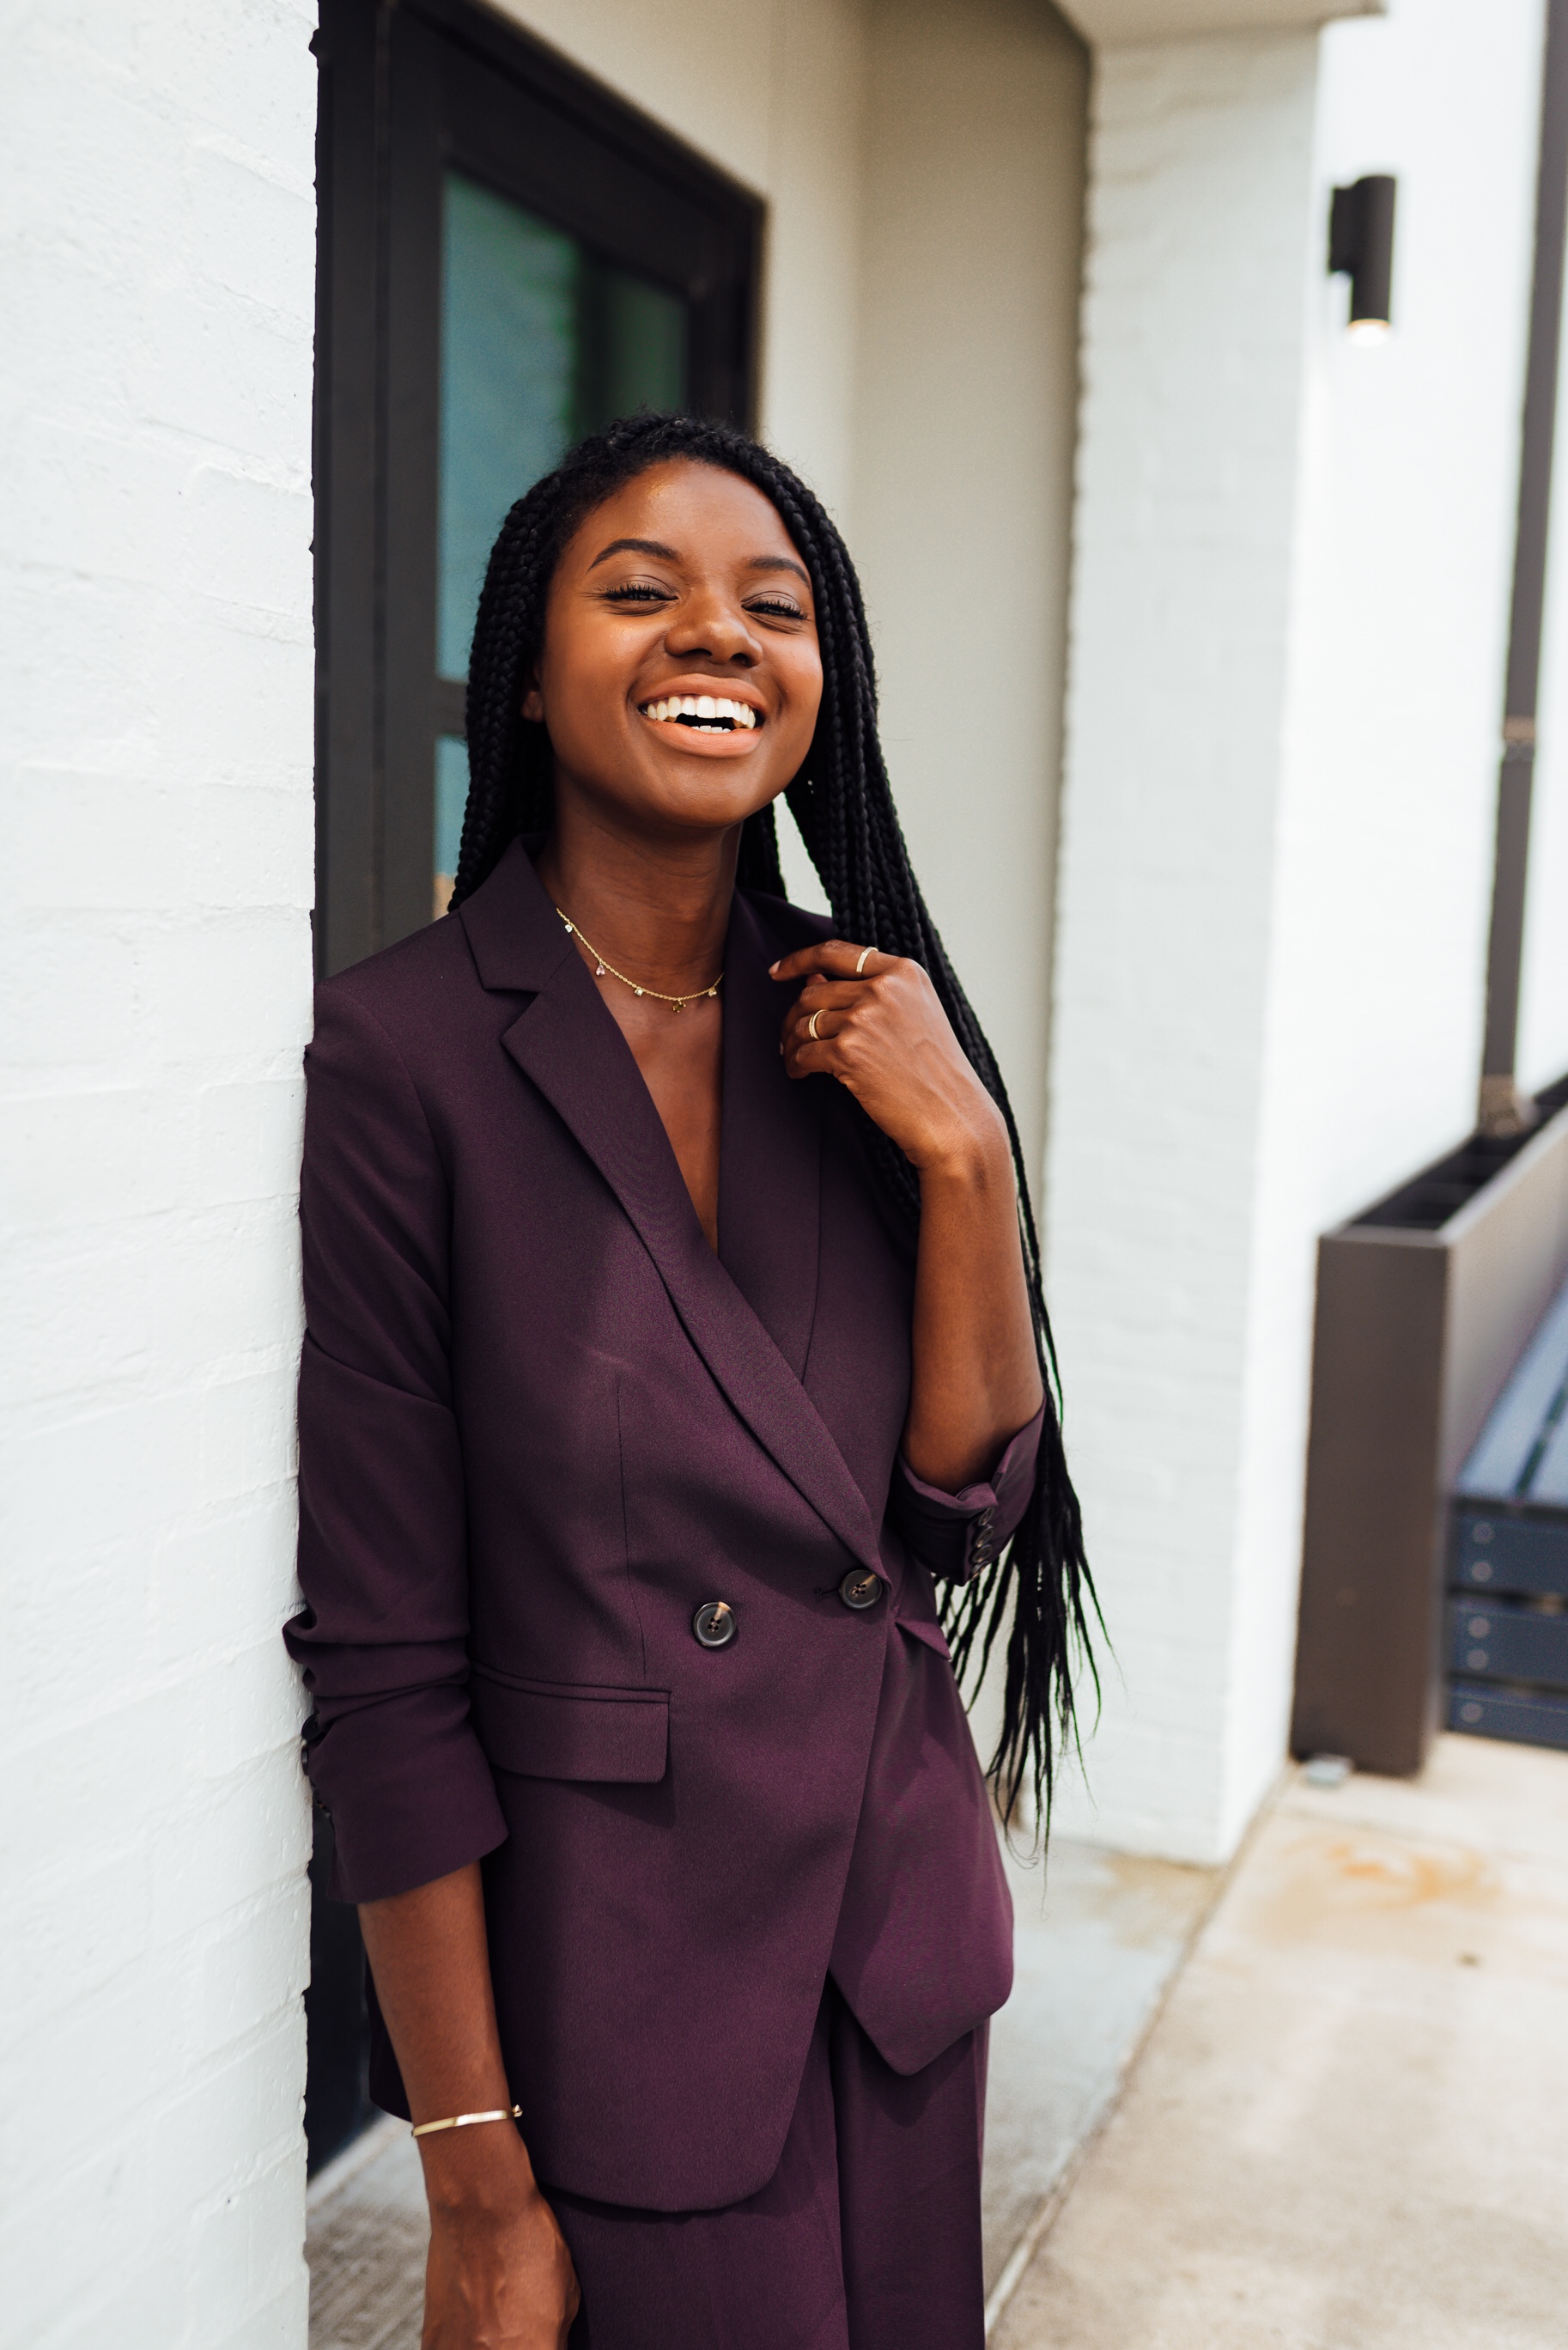 plum, fuchsia, plum and fuchsia, black style blogger, Ann Taylor, women's coordinating suit, wide leg pant, fall outfit ideas, knotless box braids, fuchsia slingback heels, braids for the work place, professional braid hairstyles, smiling black girl